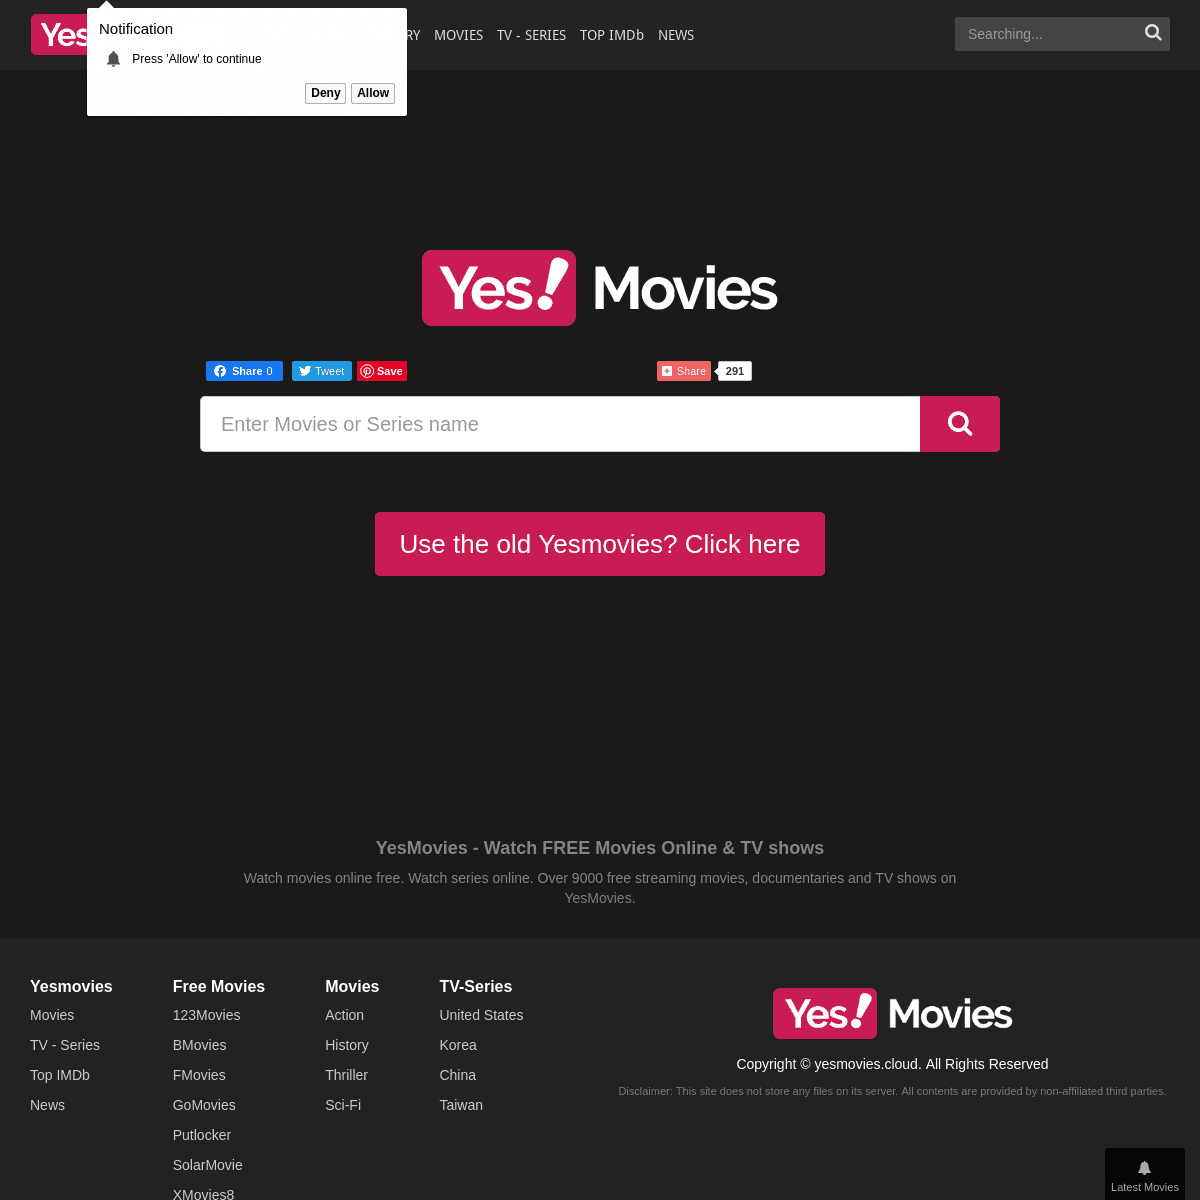 A complete backup of yesmovies.cloud